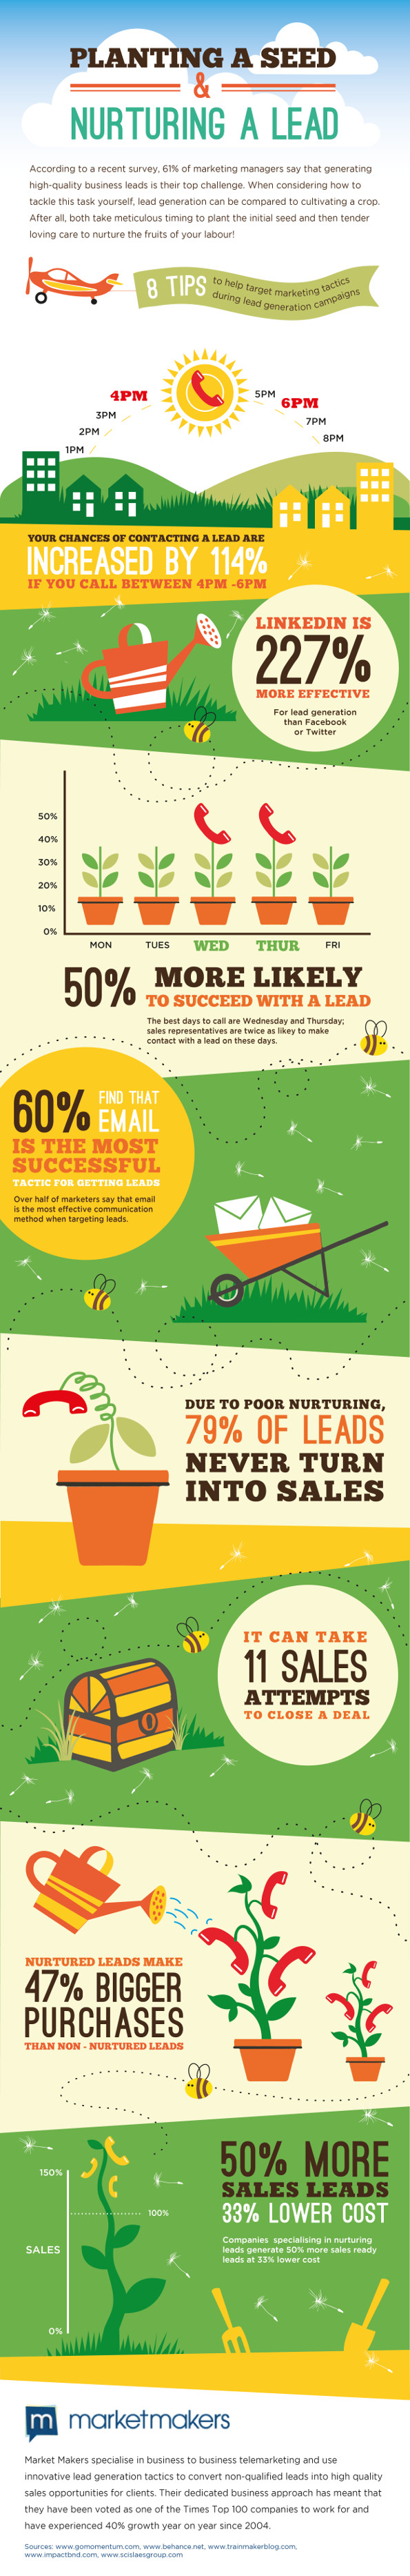 Planting a seed and nurturing a lead infographic Are You Cultivating a Crop of Leads? 